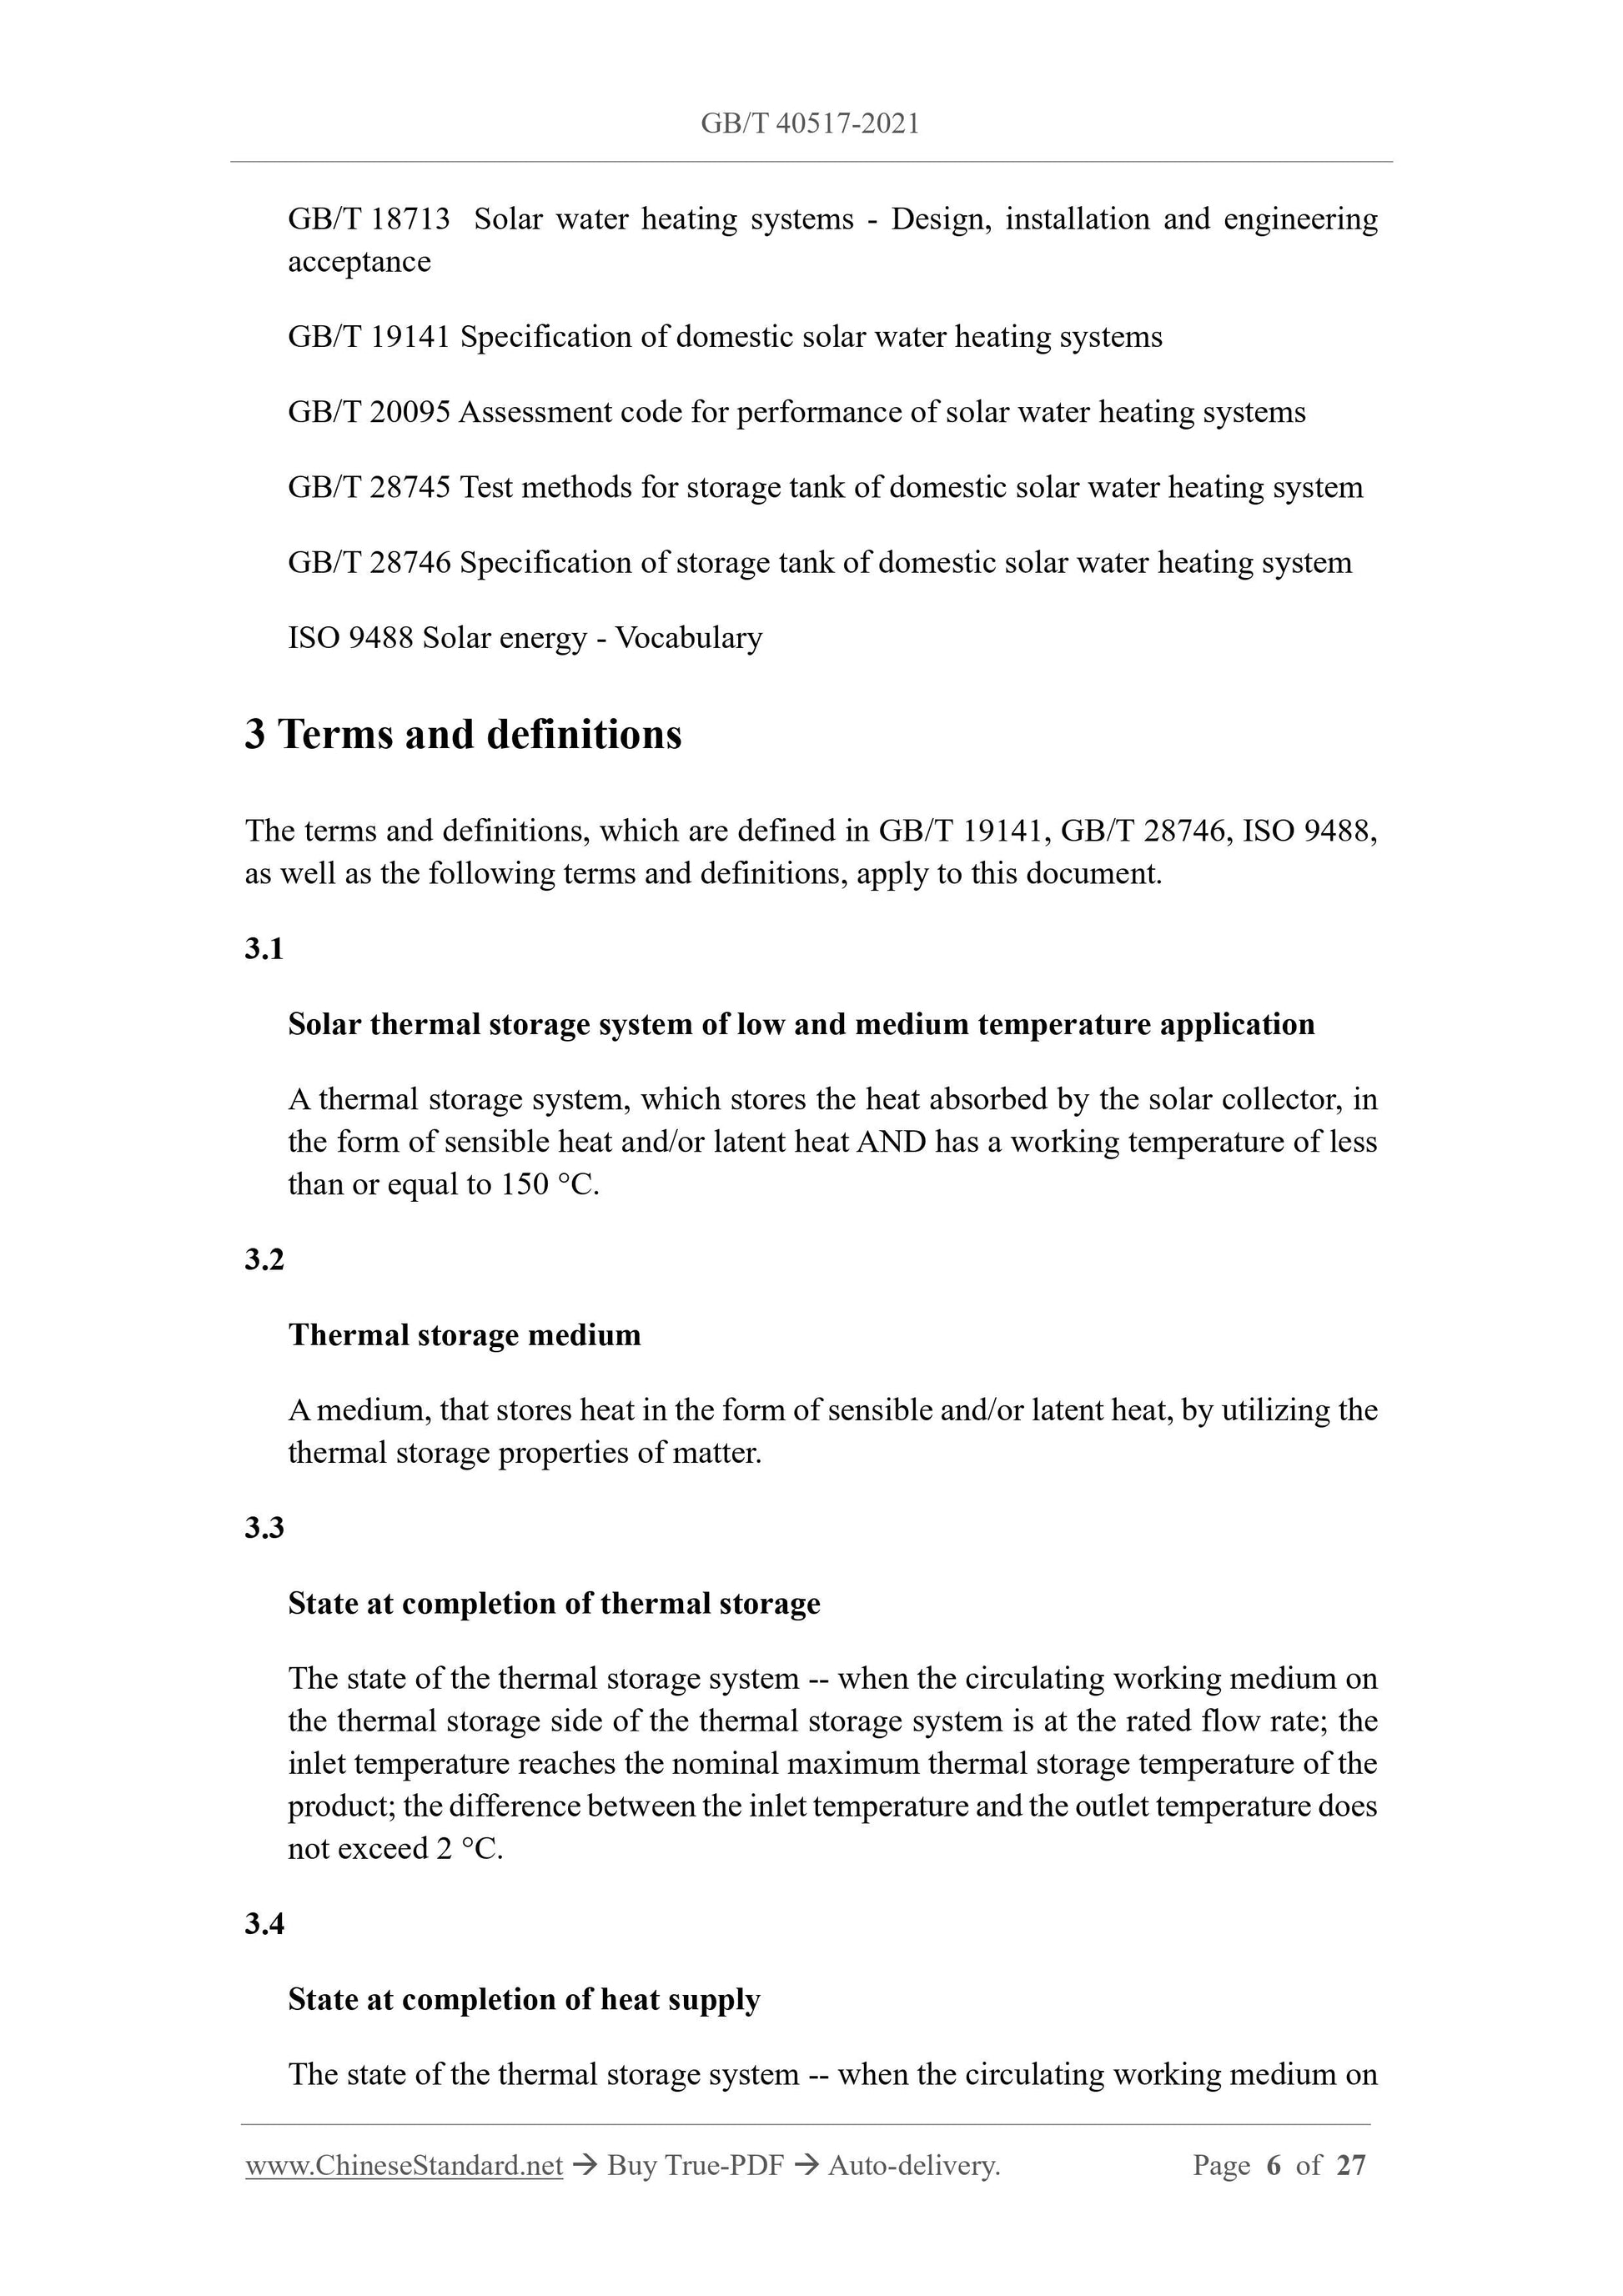 GB/T 40517-2021 Page 5